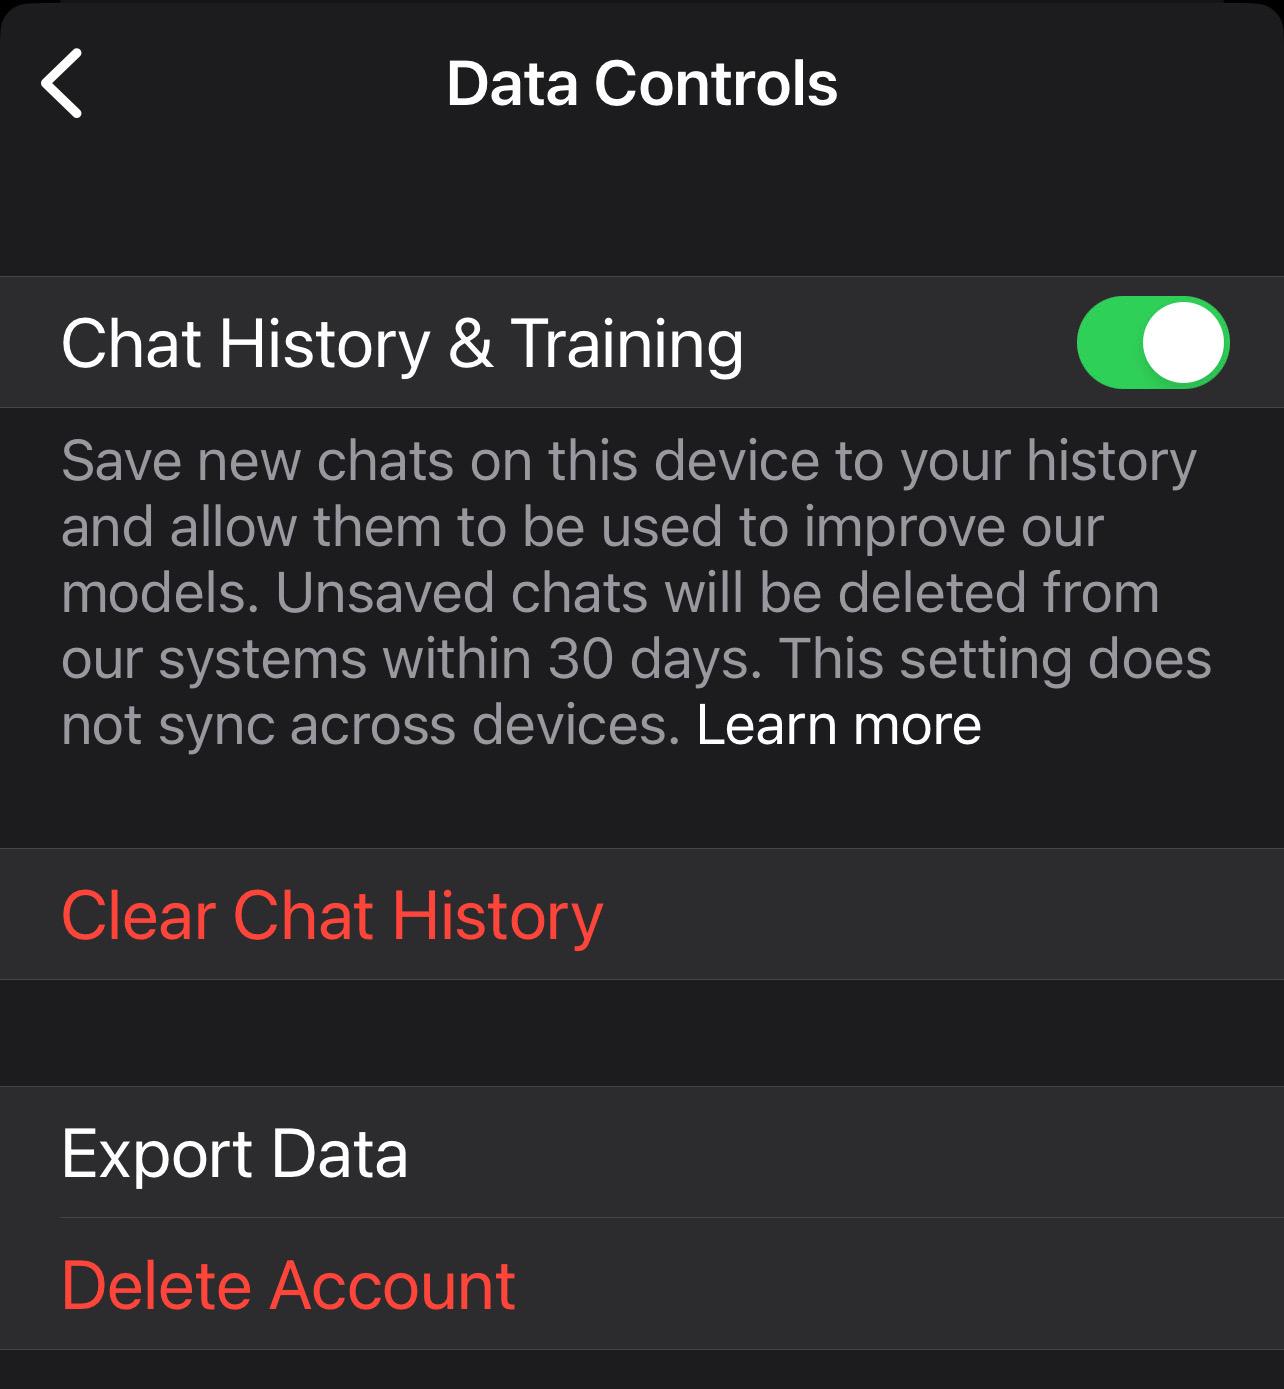 Once in the Data Controls settings in your ChatGPT mobile app, tap Clear Chat History and toggle off Chat history and training.